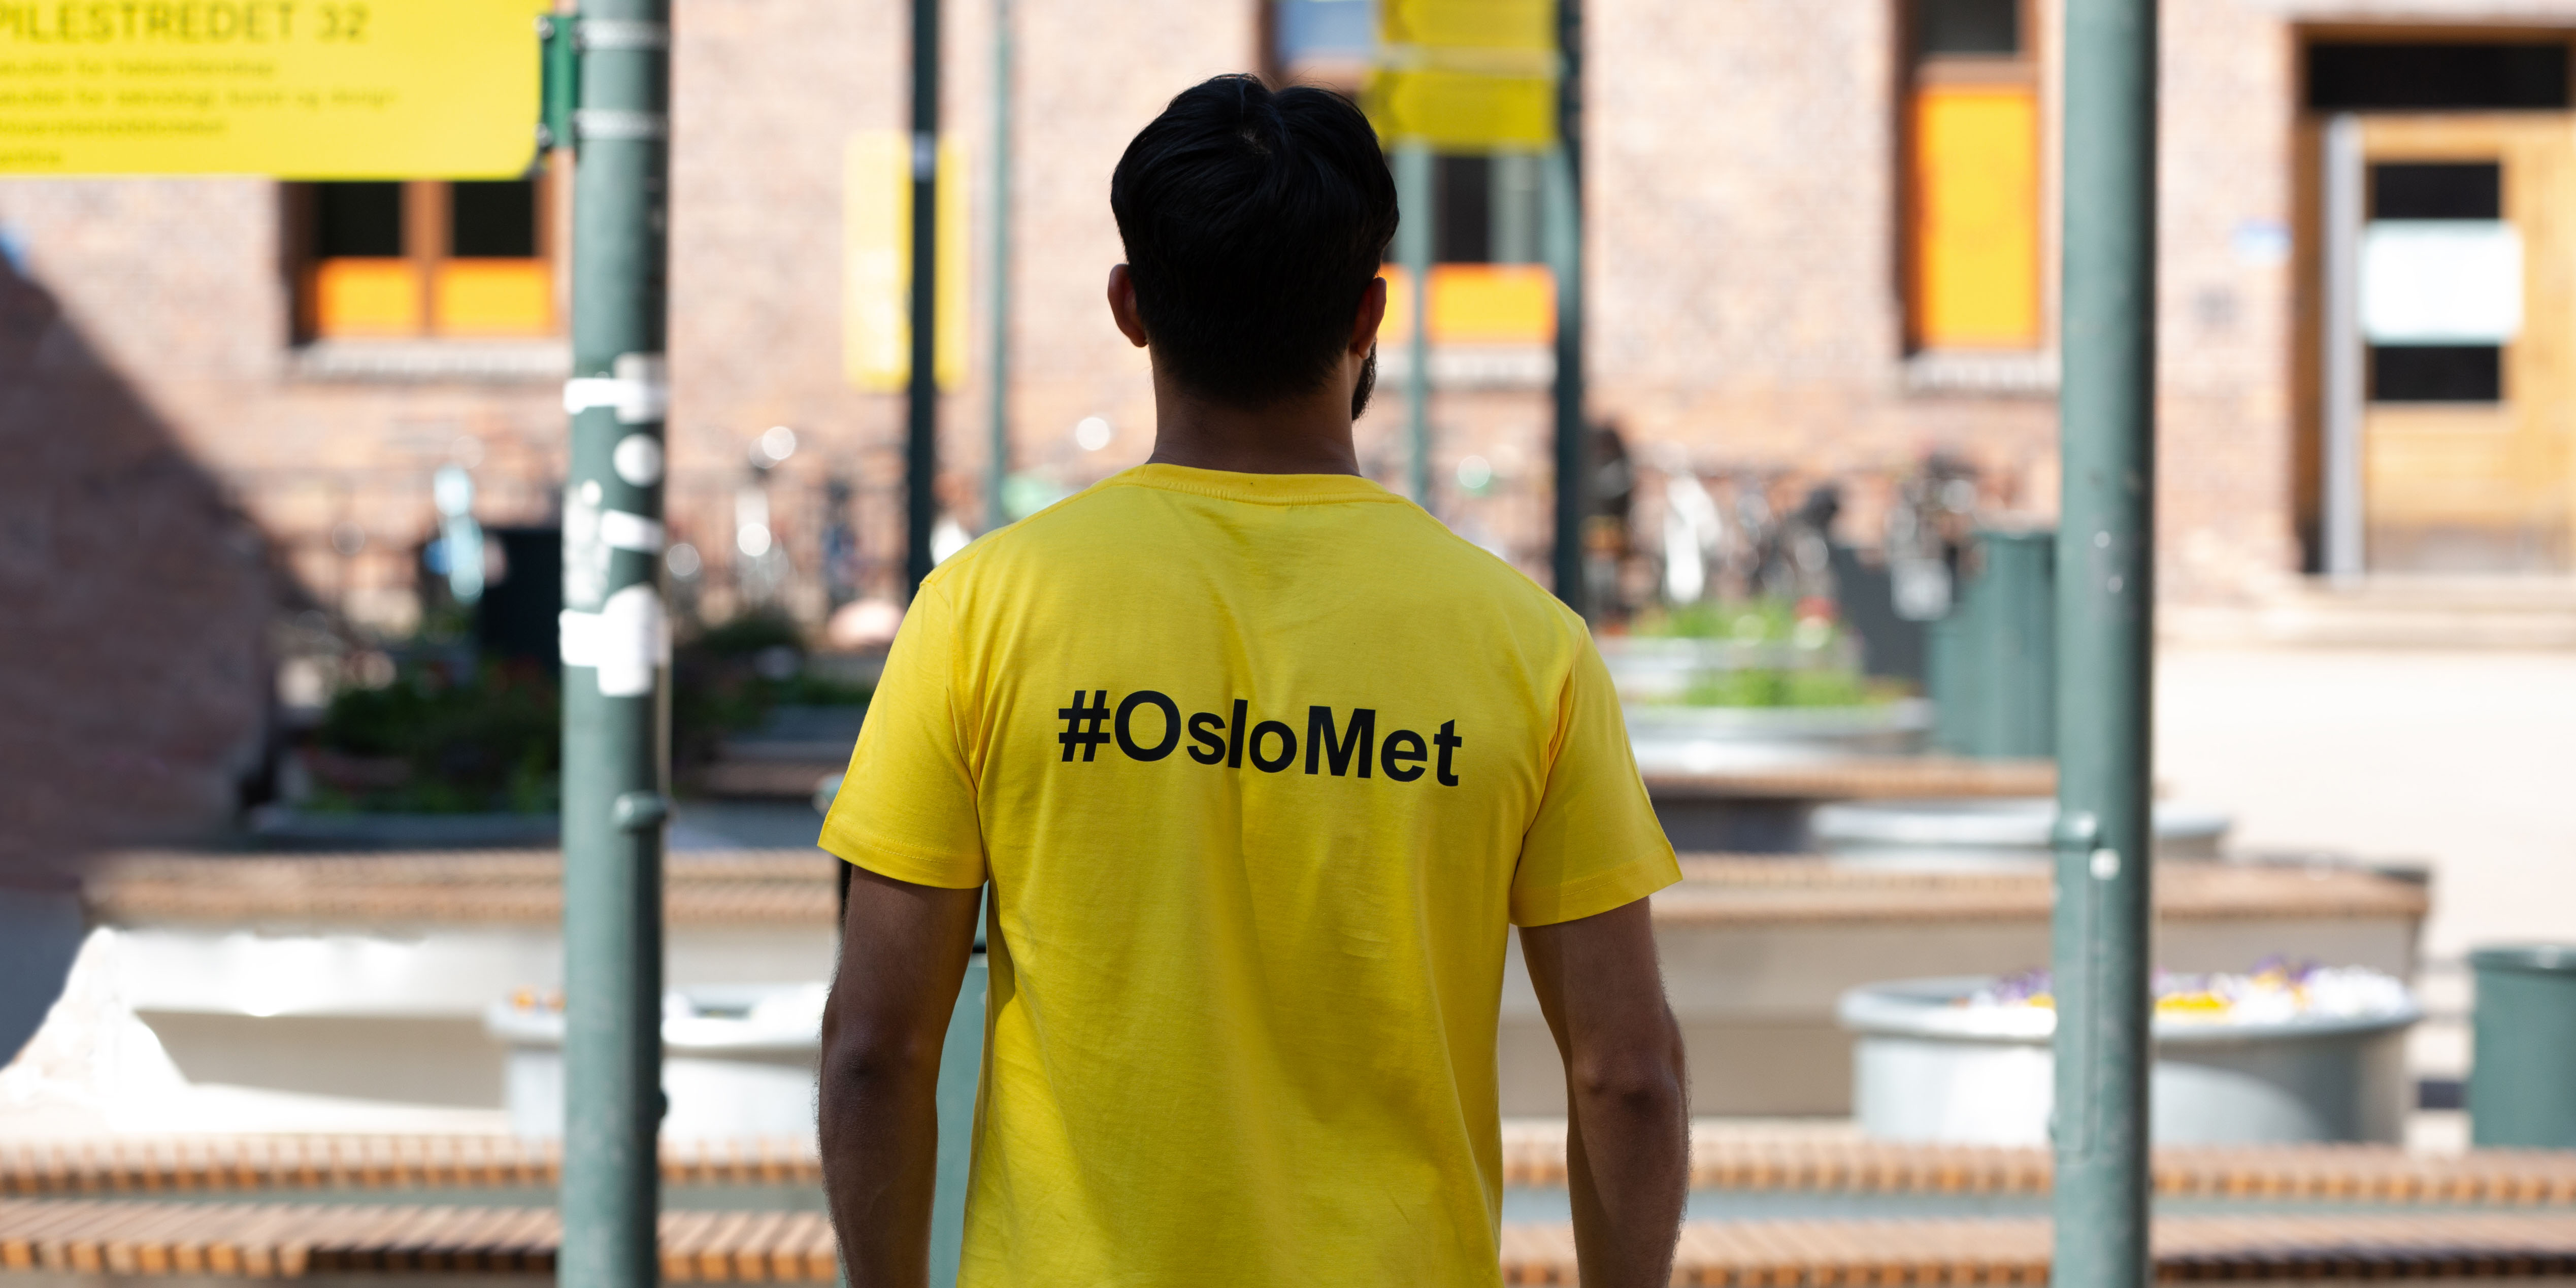 A boy is wearing a yellow t-shirt with the text #OsloMet in black on the back